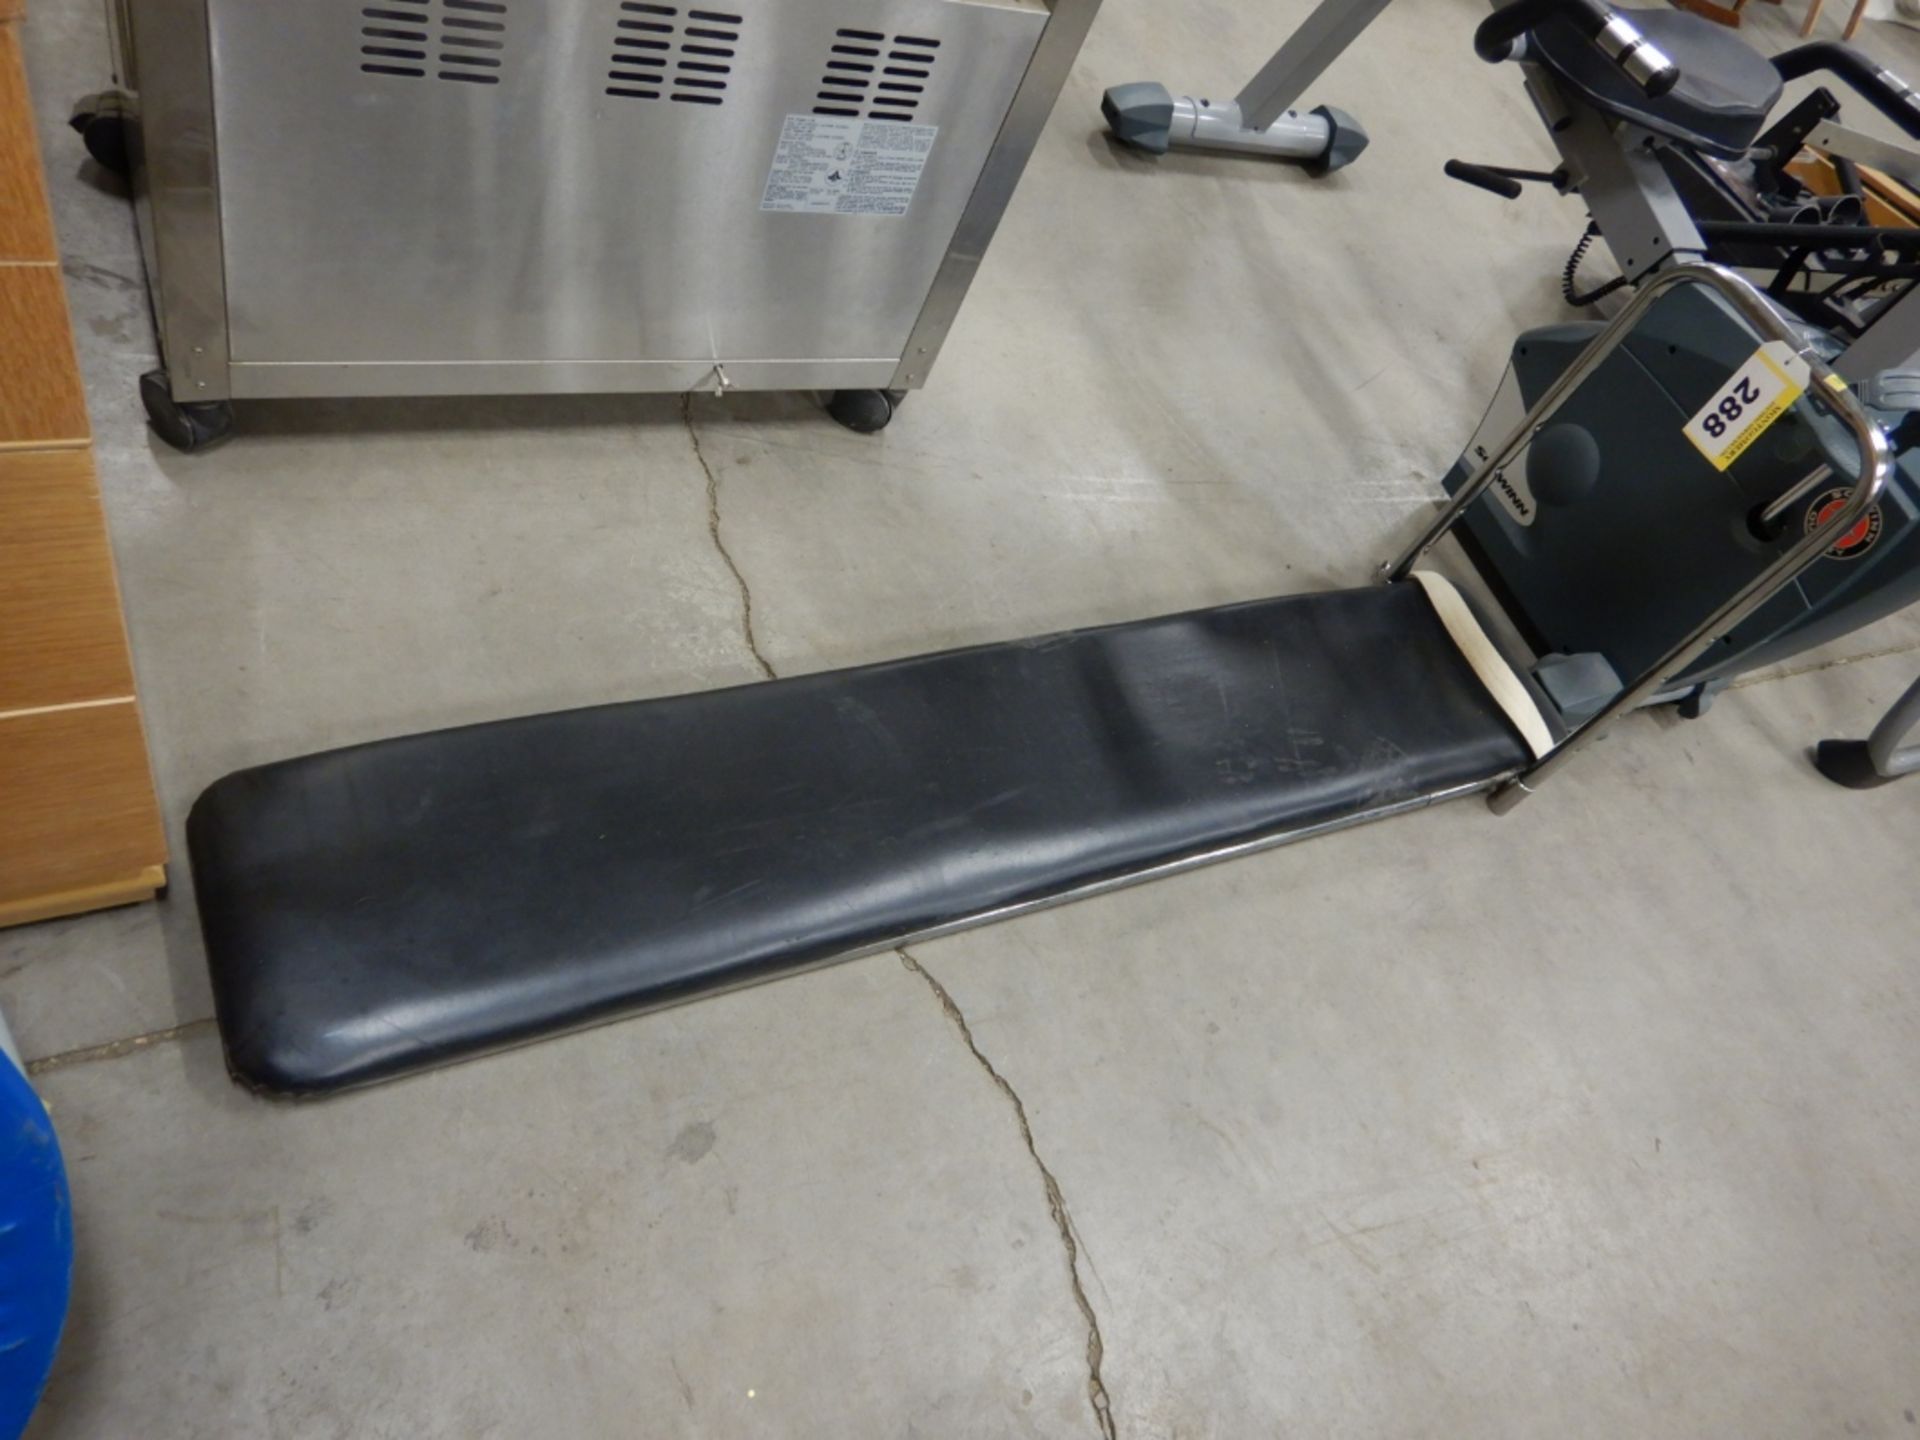 ADJUSTABLE INCLINE EXERCISE BENCH - 64IN LONG